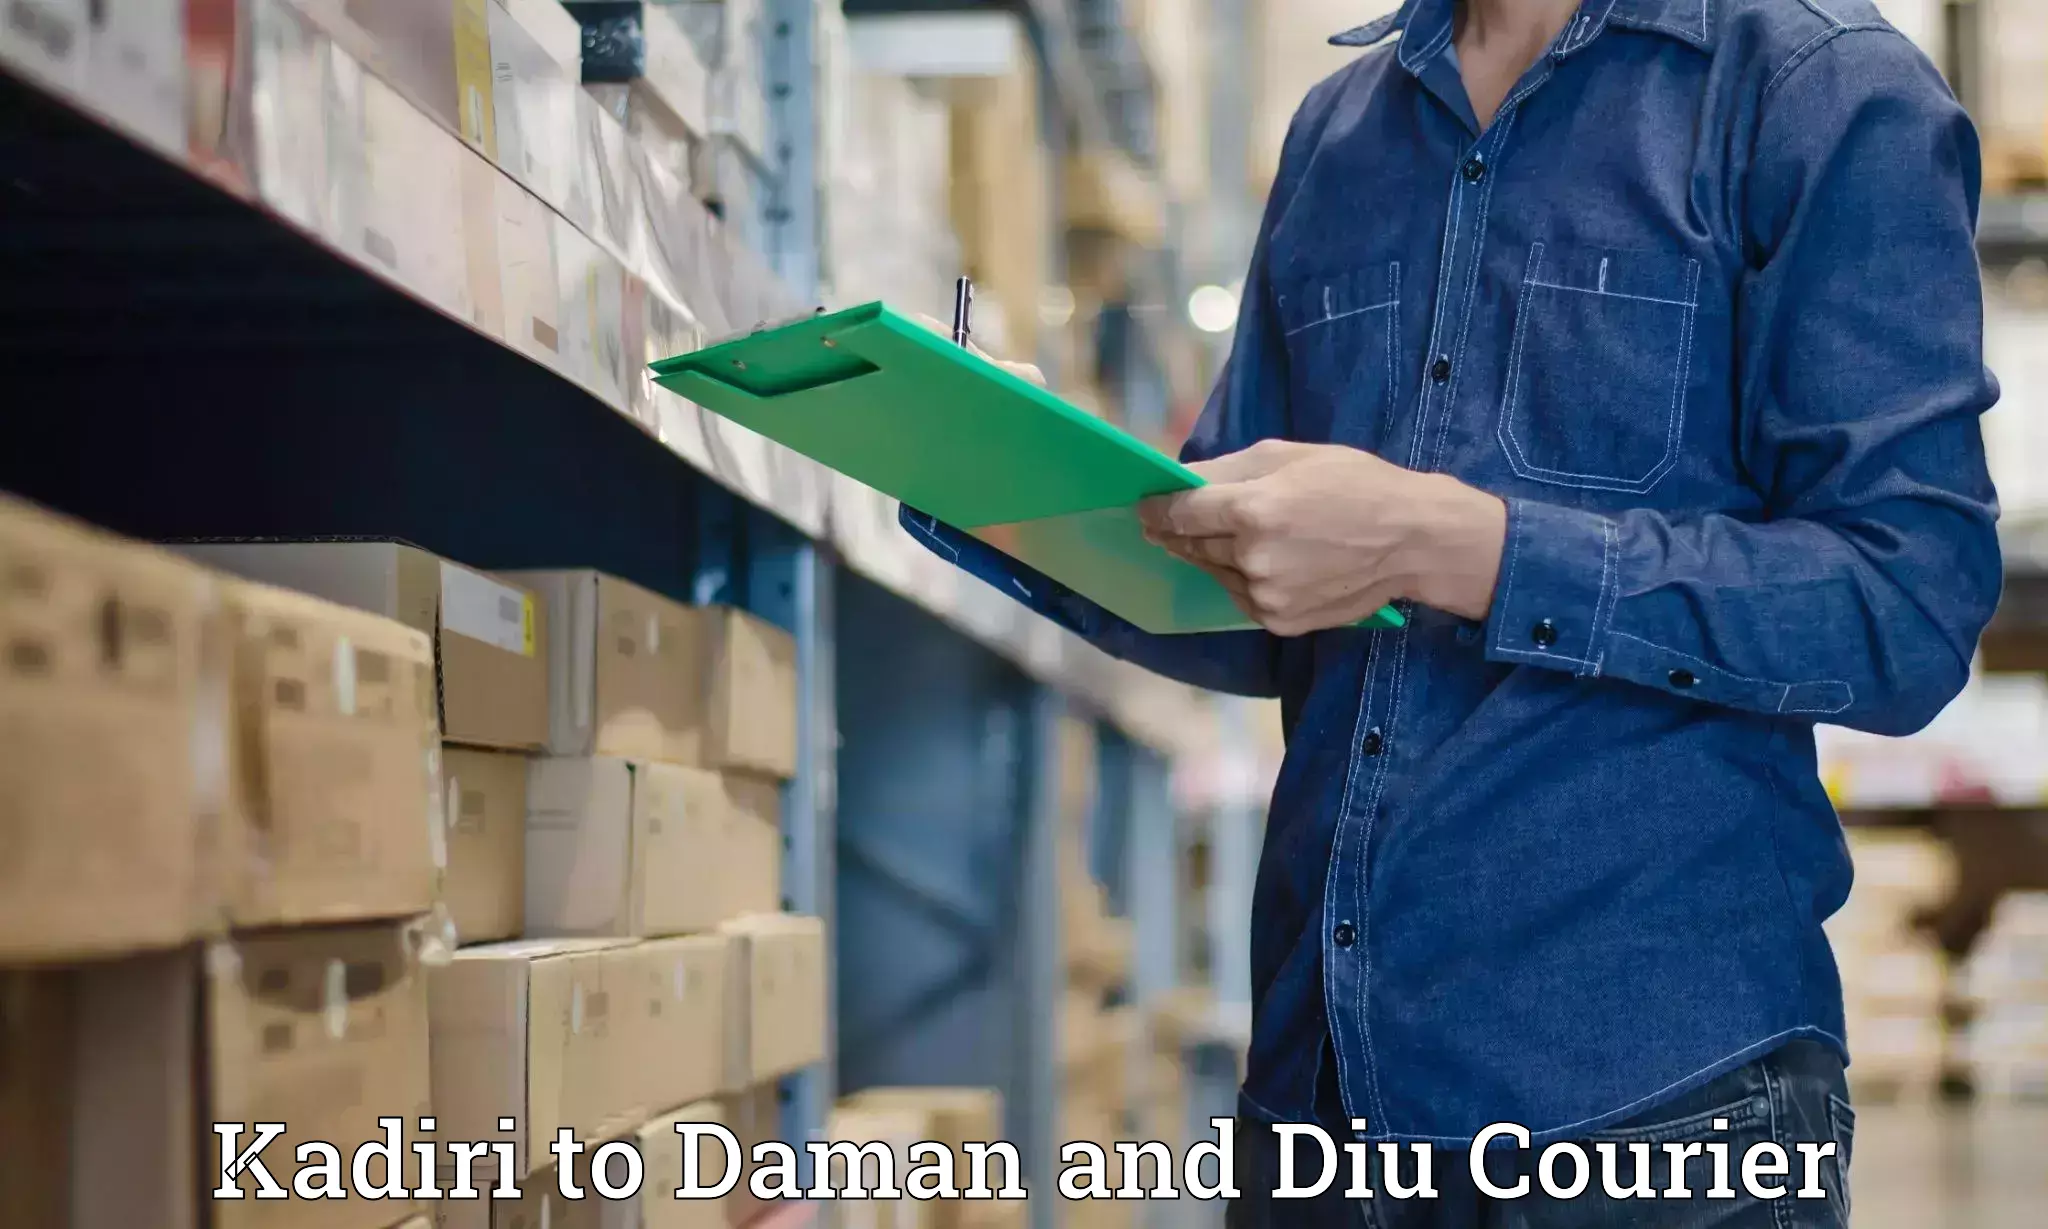 Speedy delivery service in Kadiri to Daman and Diu